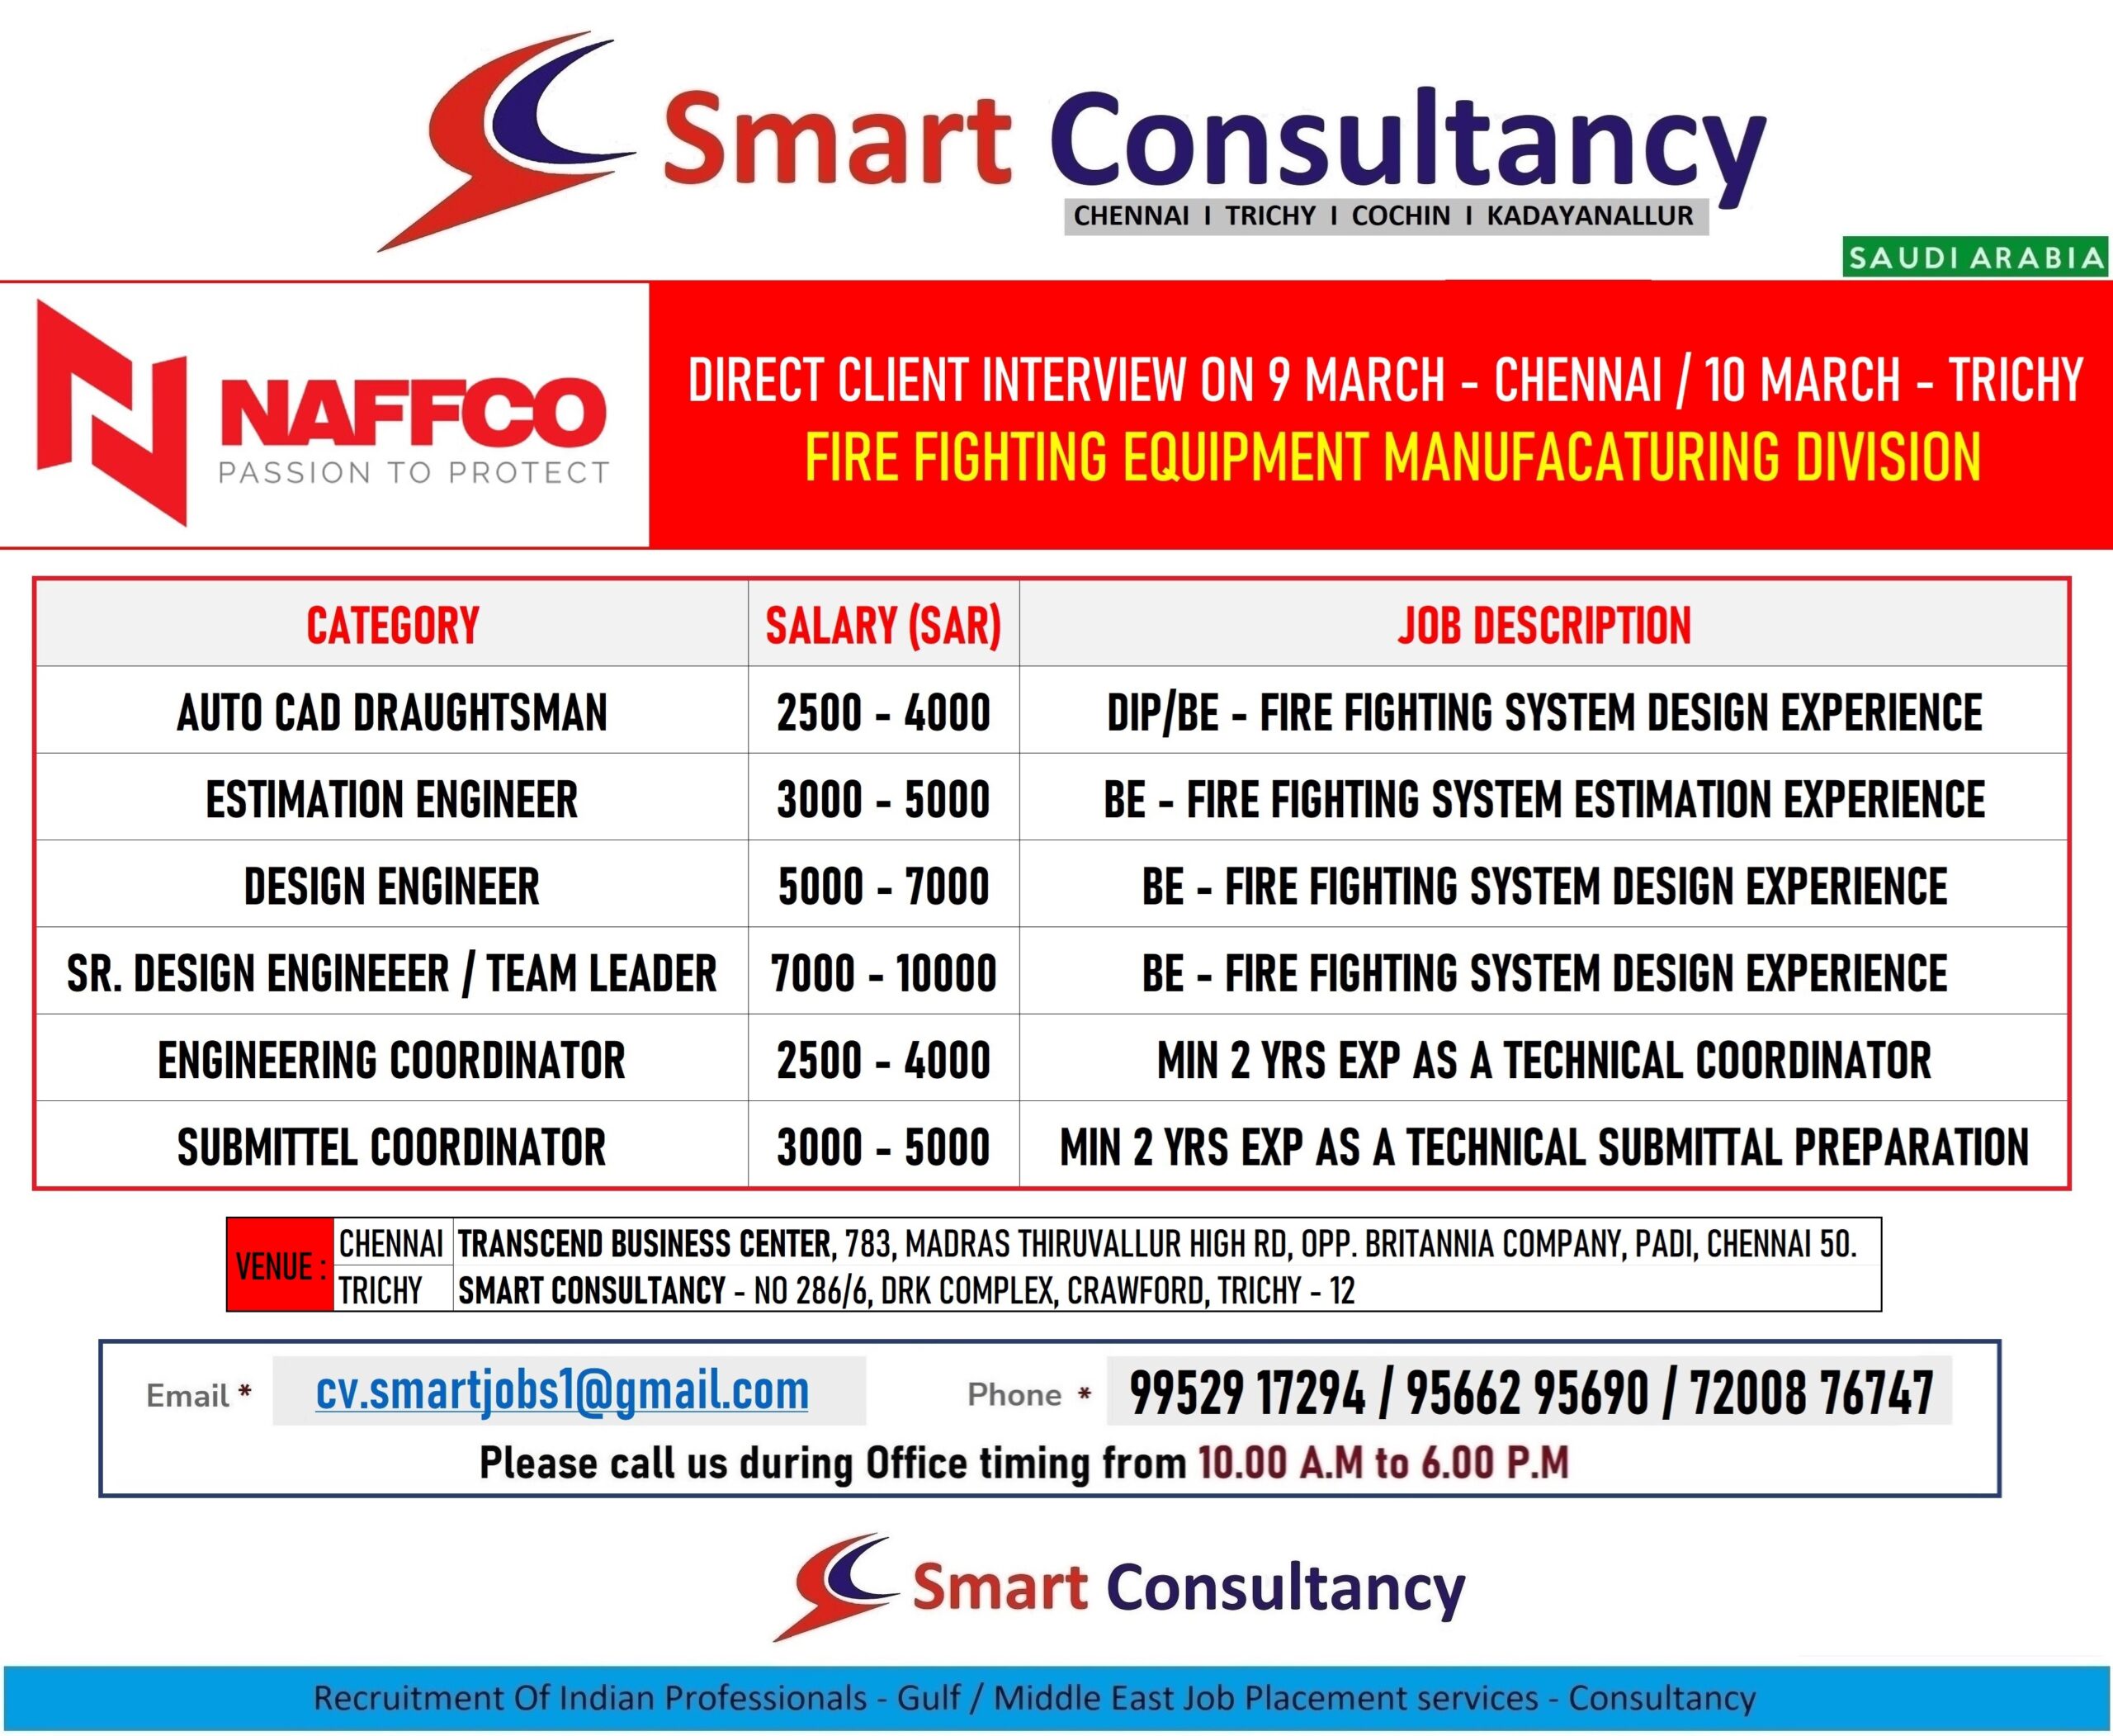 WANTED FOR A LEADING FIRE EQUIPMENT MANUFACTURING COMPANY – SAUDI / DIRECT CLIENT INTERVIEW ON 9 MARCH – CHENNAI / 10 MARCH – TRICHY